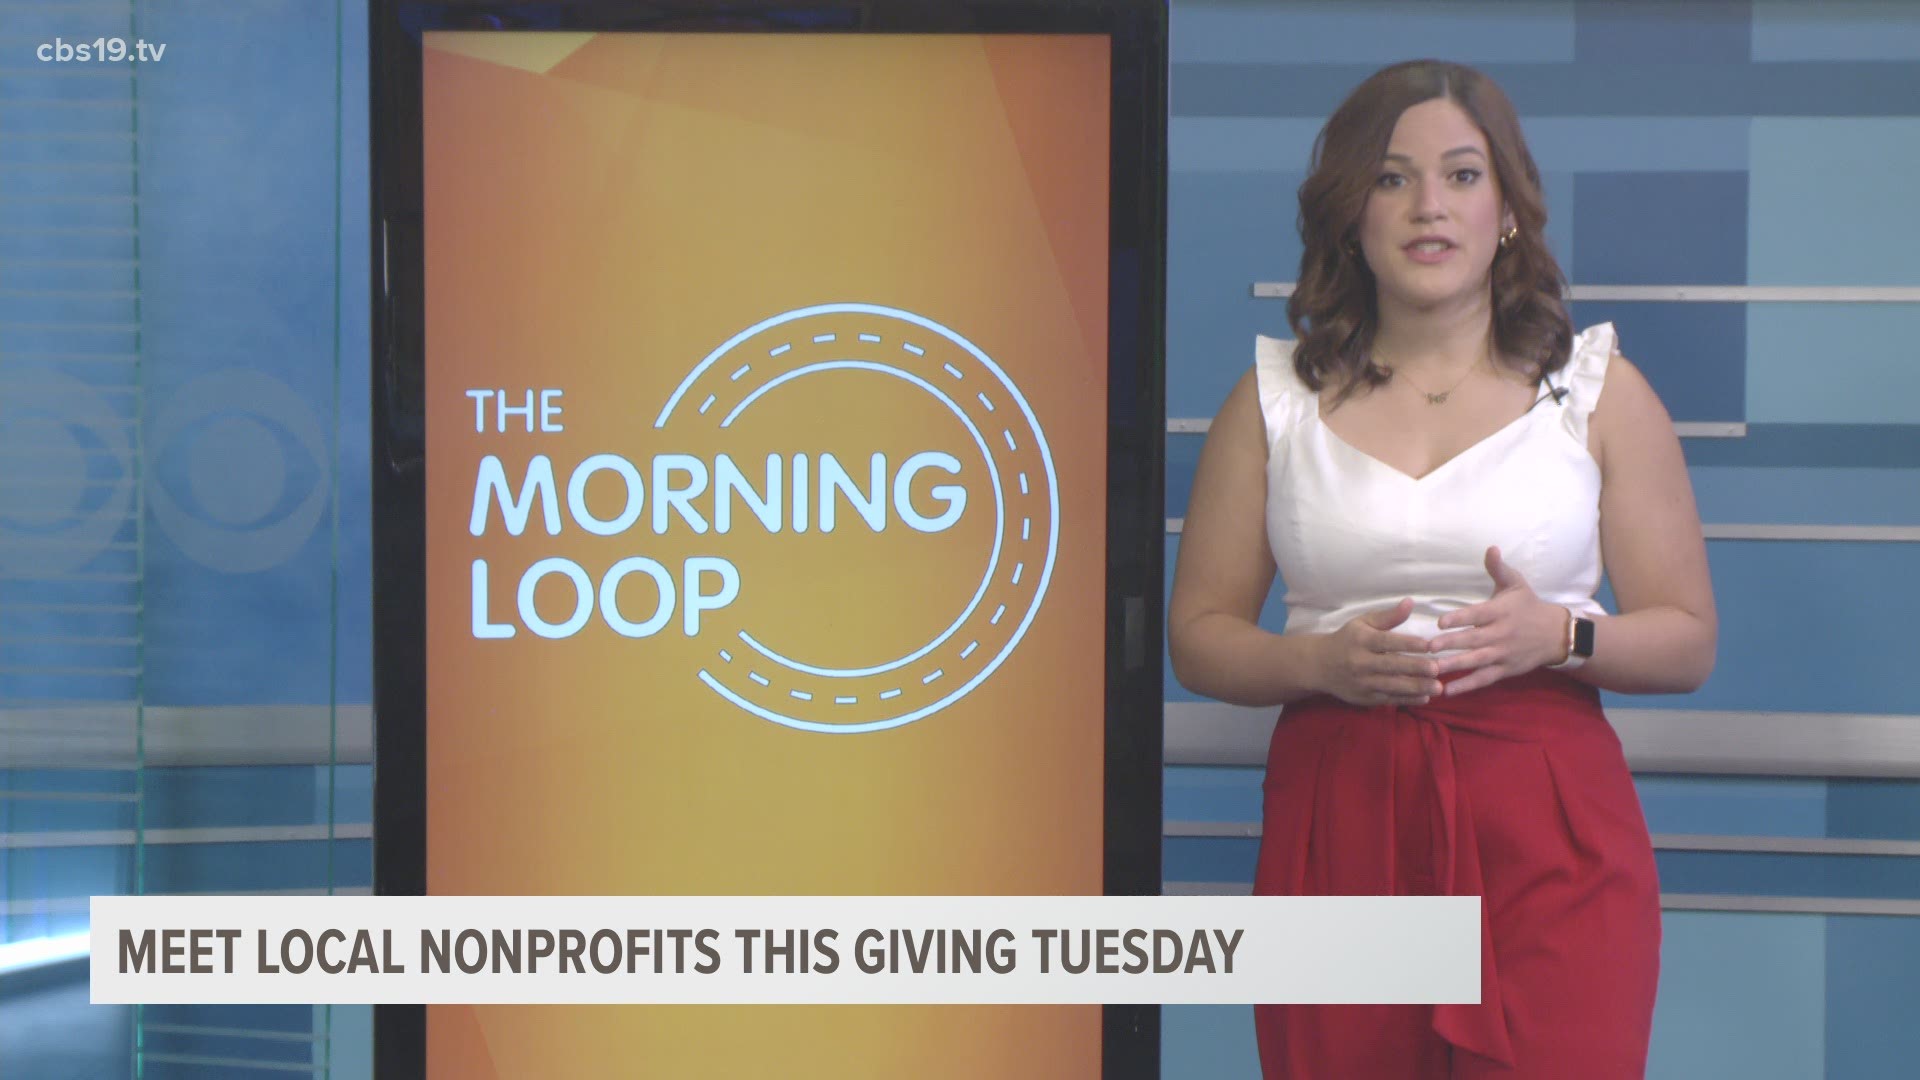 Meet local nonprofits on this Giving Tuesday